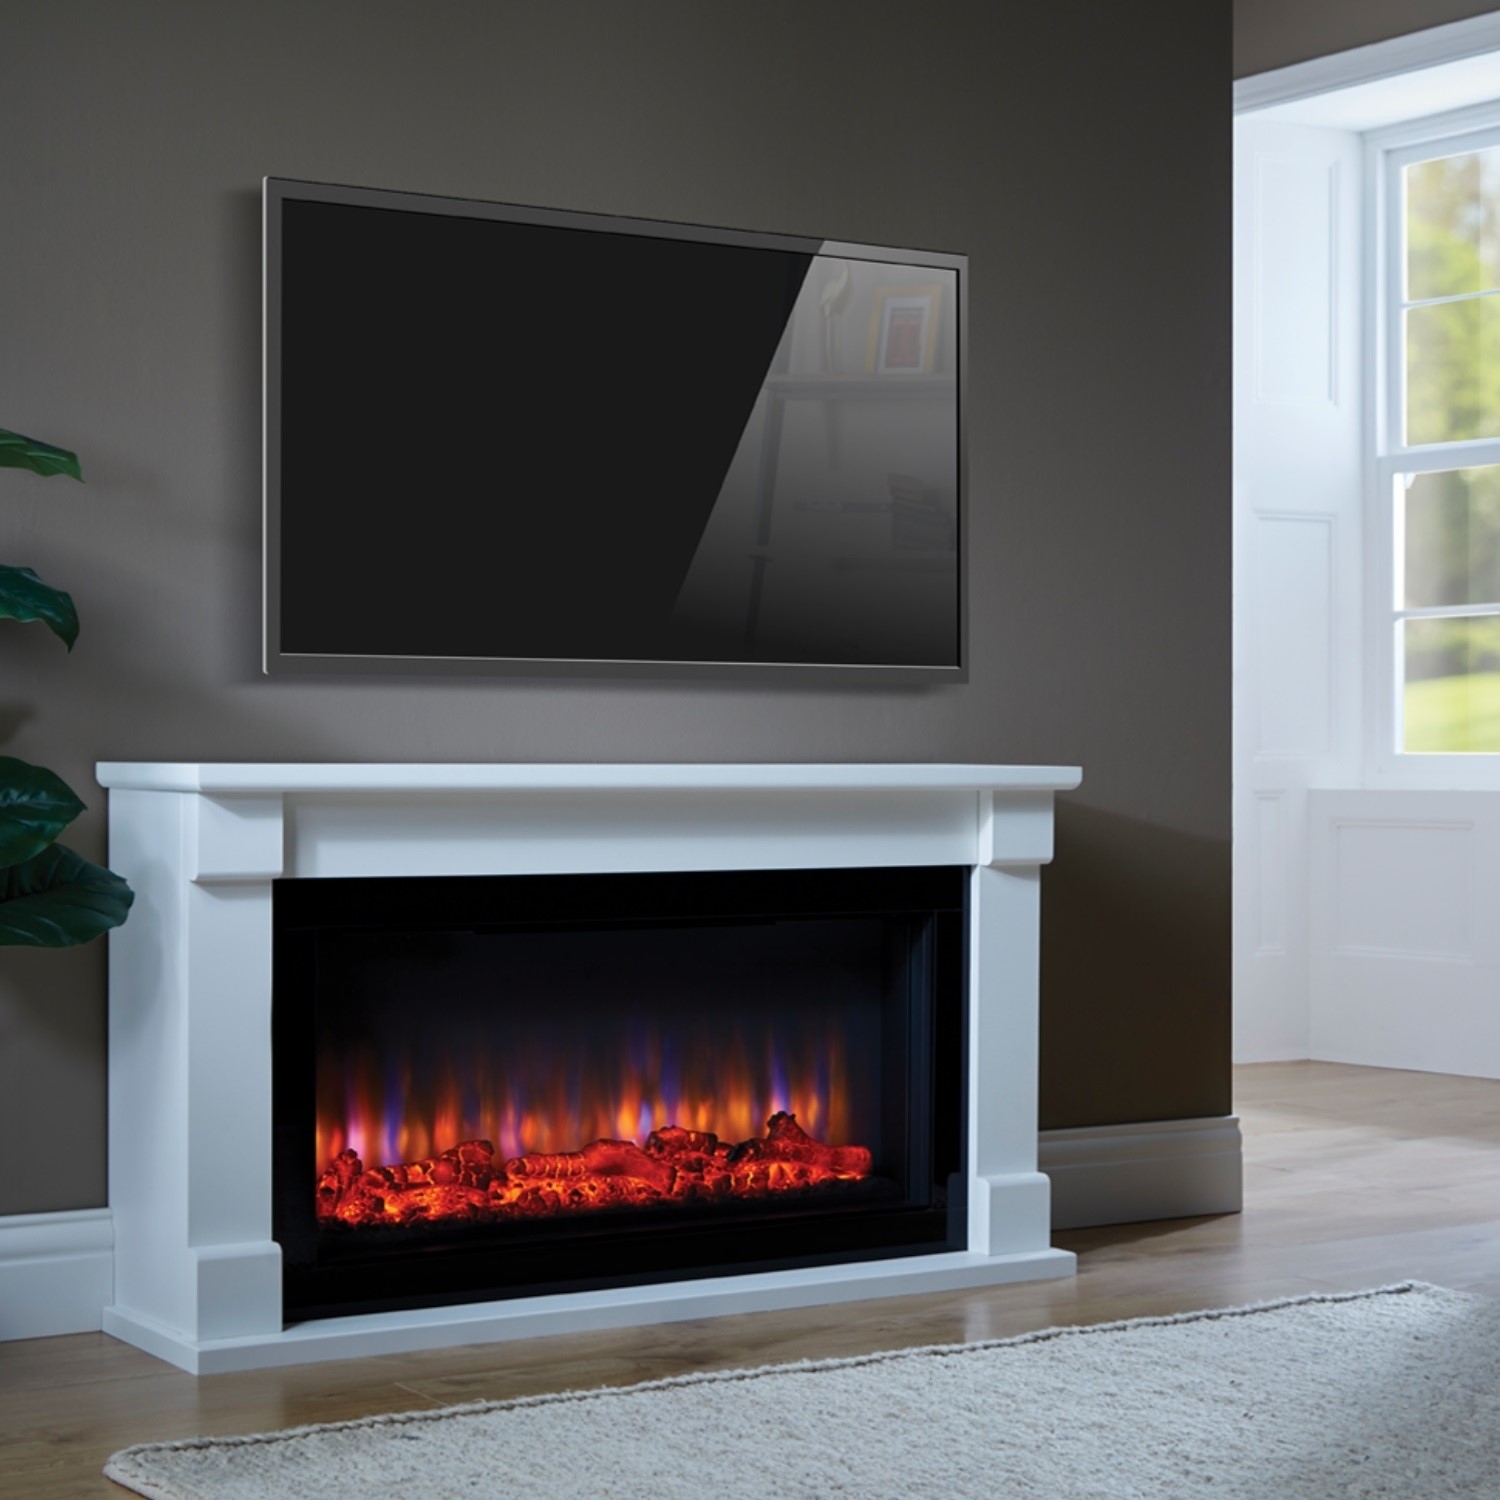 Photo of White and black freestanding wide electric fireplace suite - suncrest bradbury